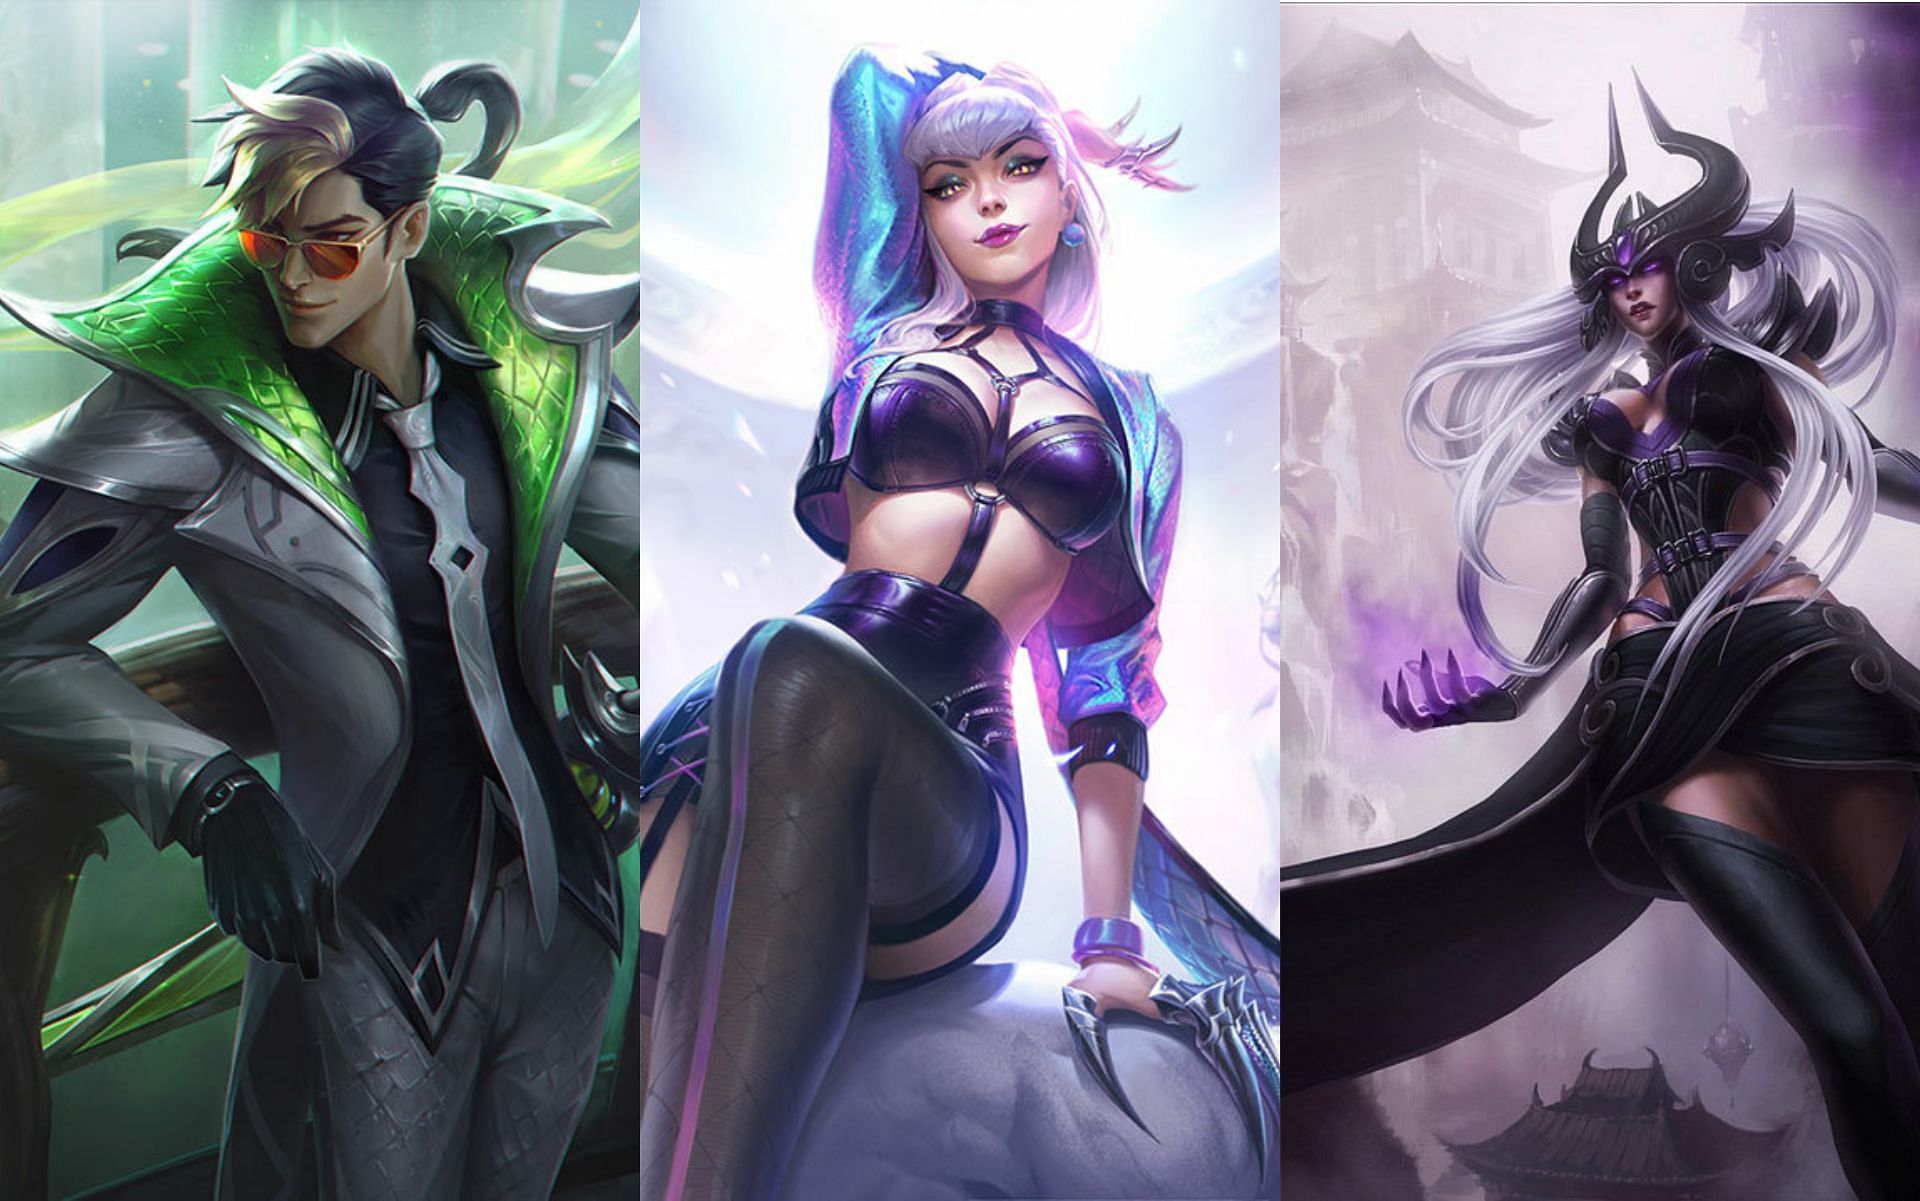 Master Yi, Syndra, and Evelynn will be part of the upcoming Spirit Blossom 2022 event (Image via League of Legends)